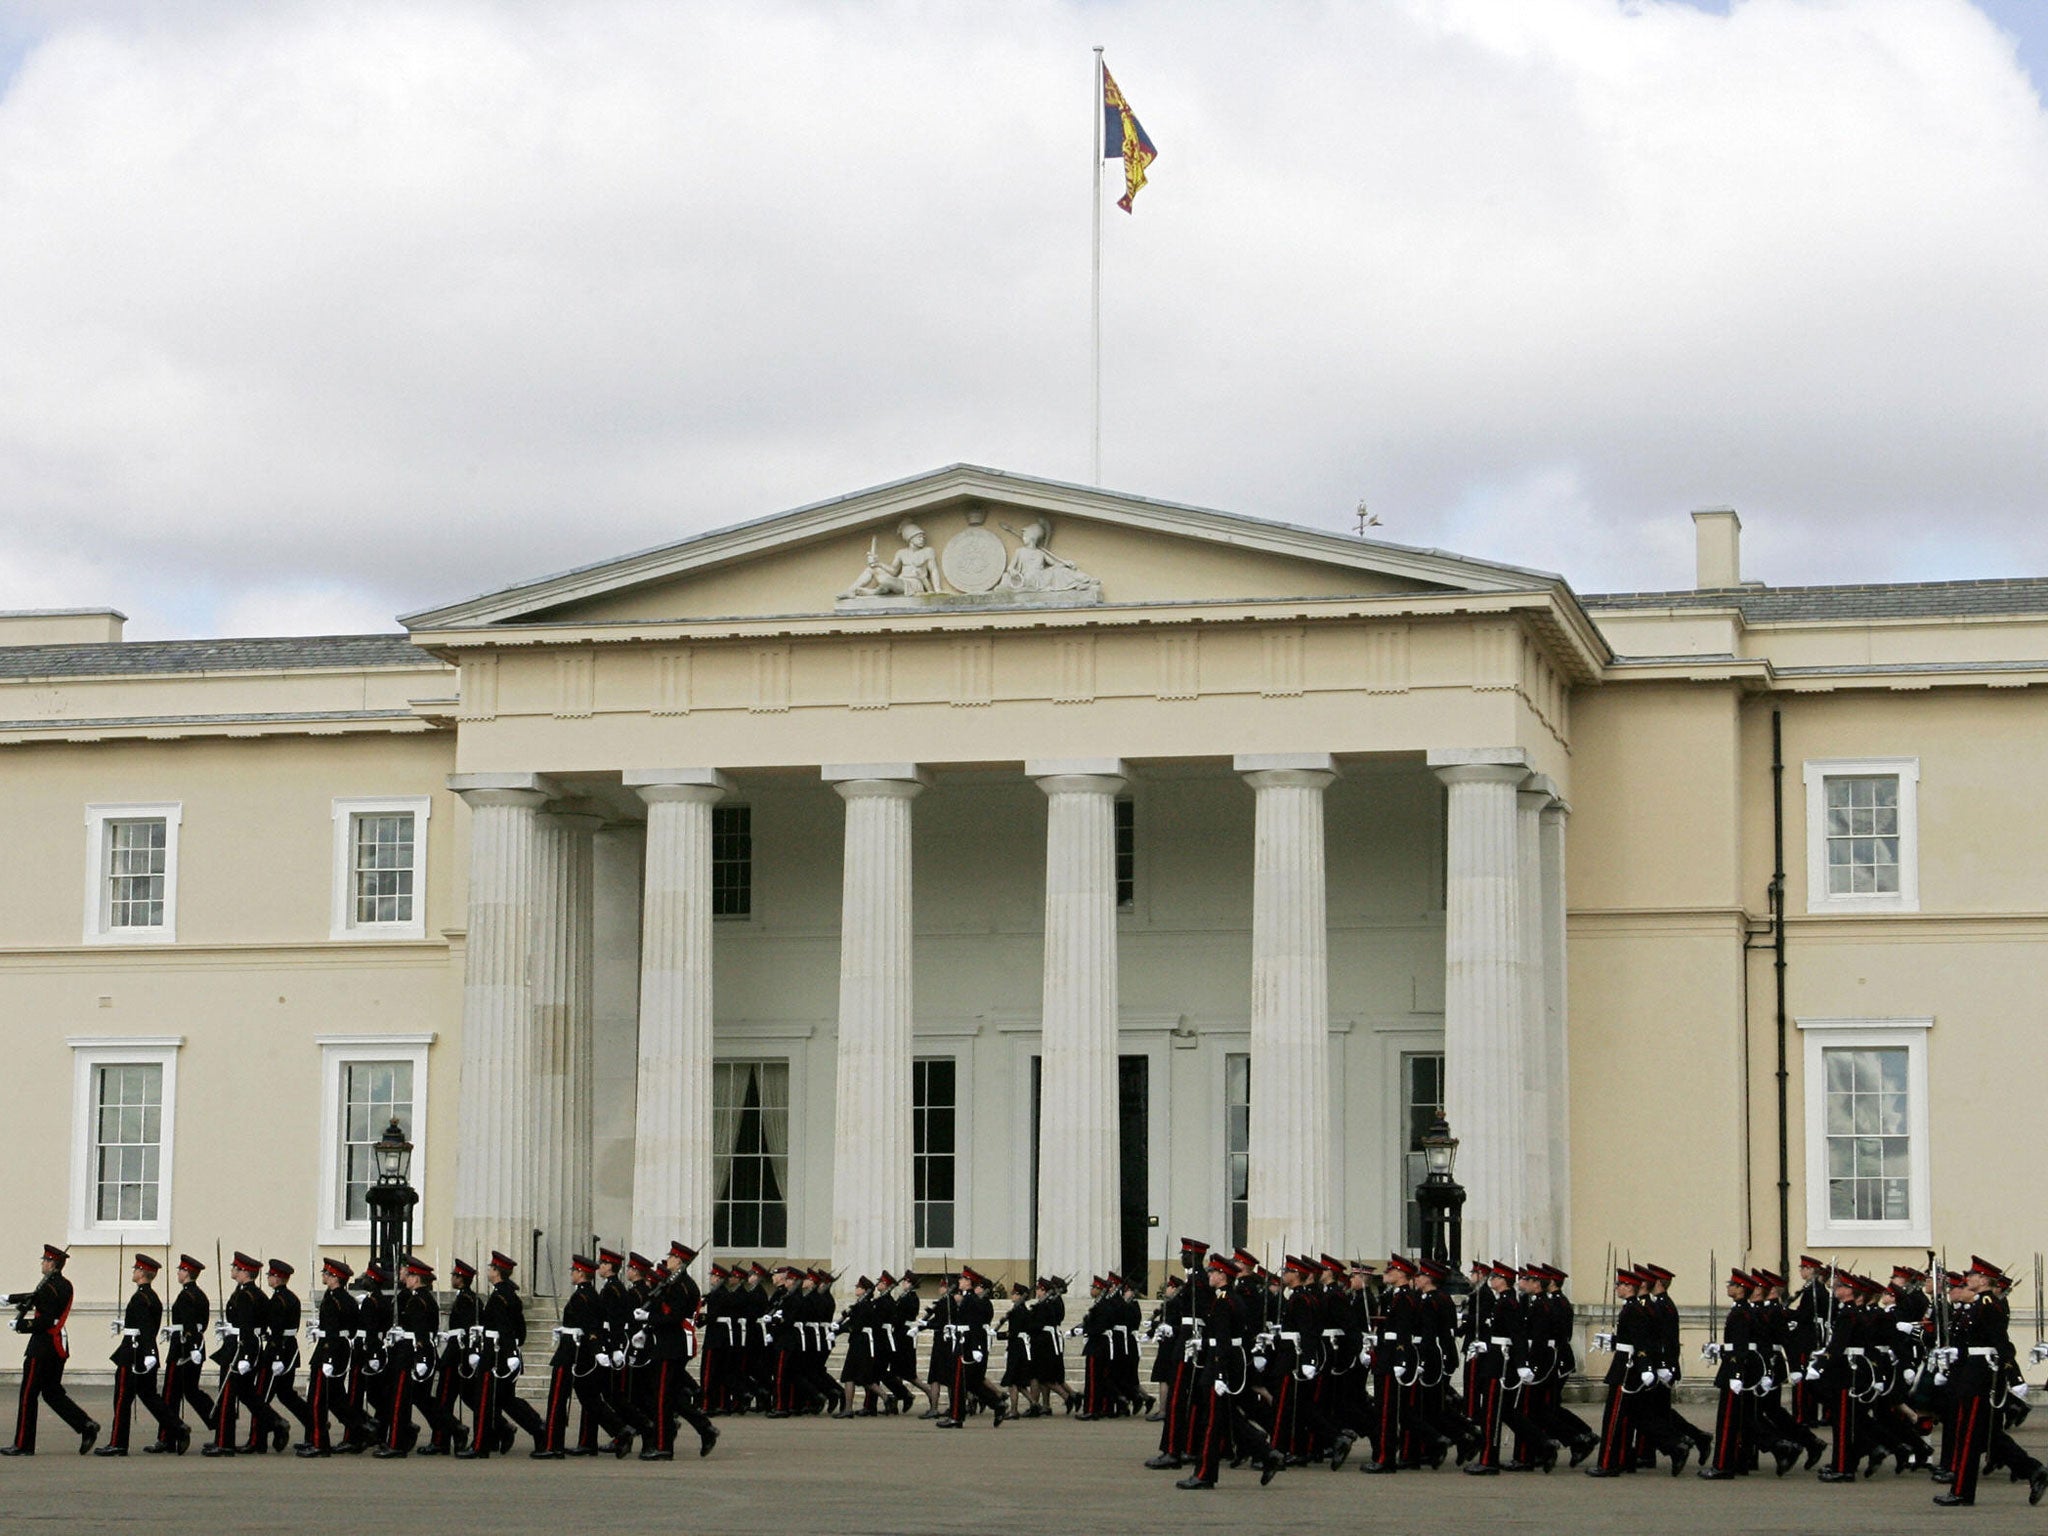 All British Army officers are trained at Sandhurst